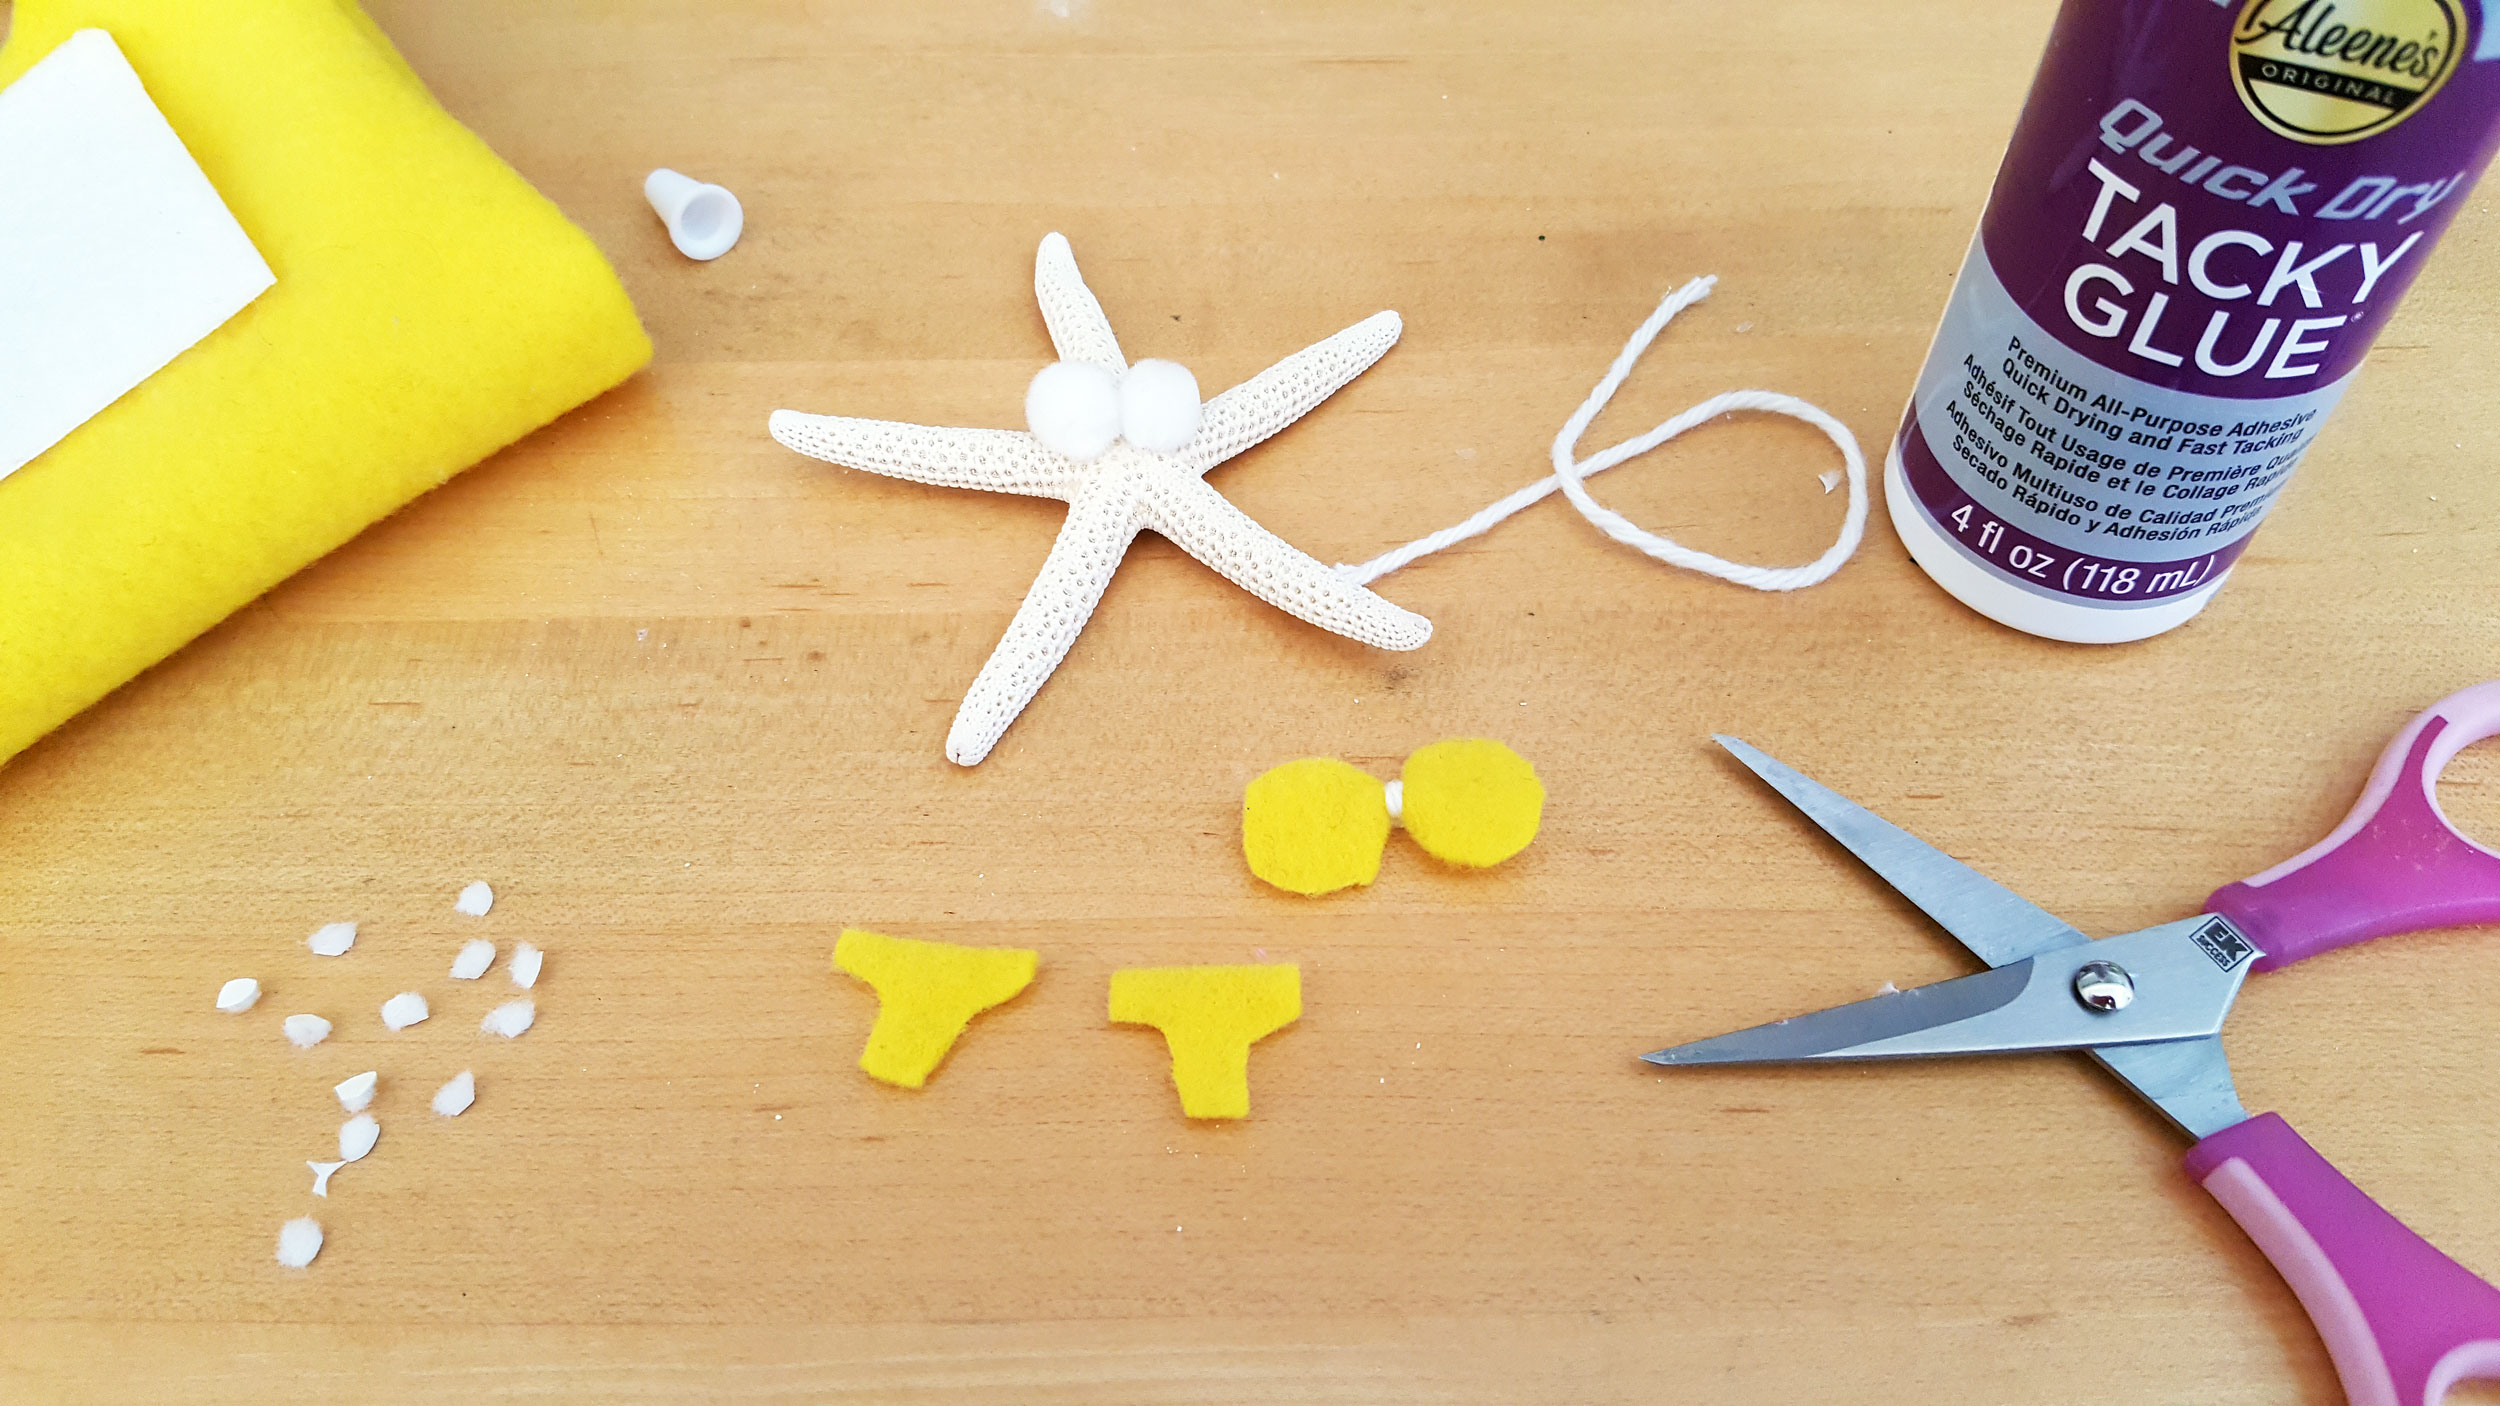 Pieces of felt cut in various small shapes by sewing scissors. | OrnamentShop.com